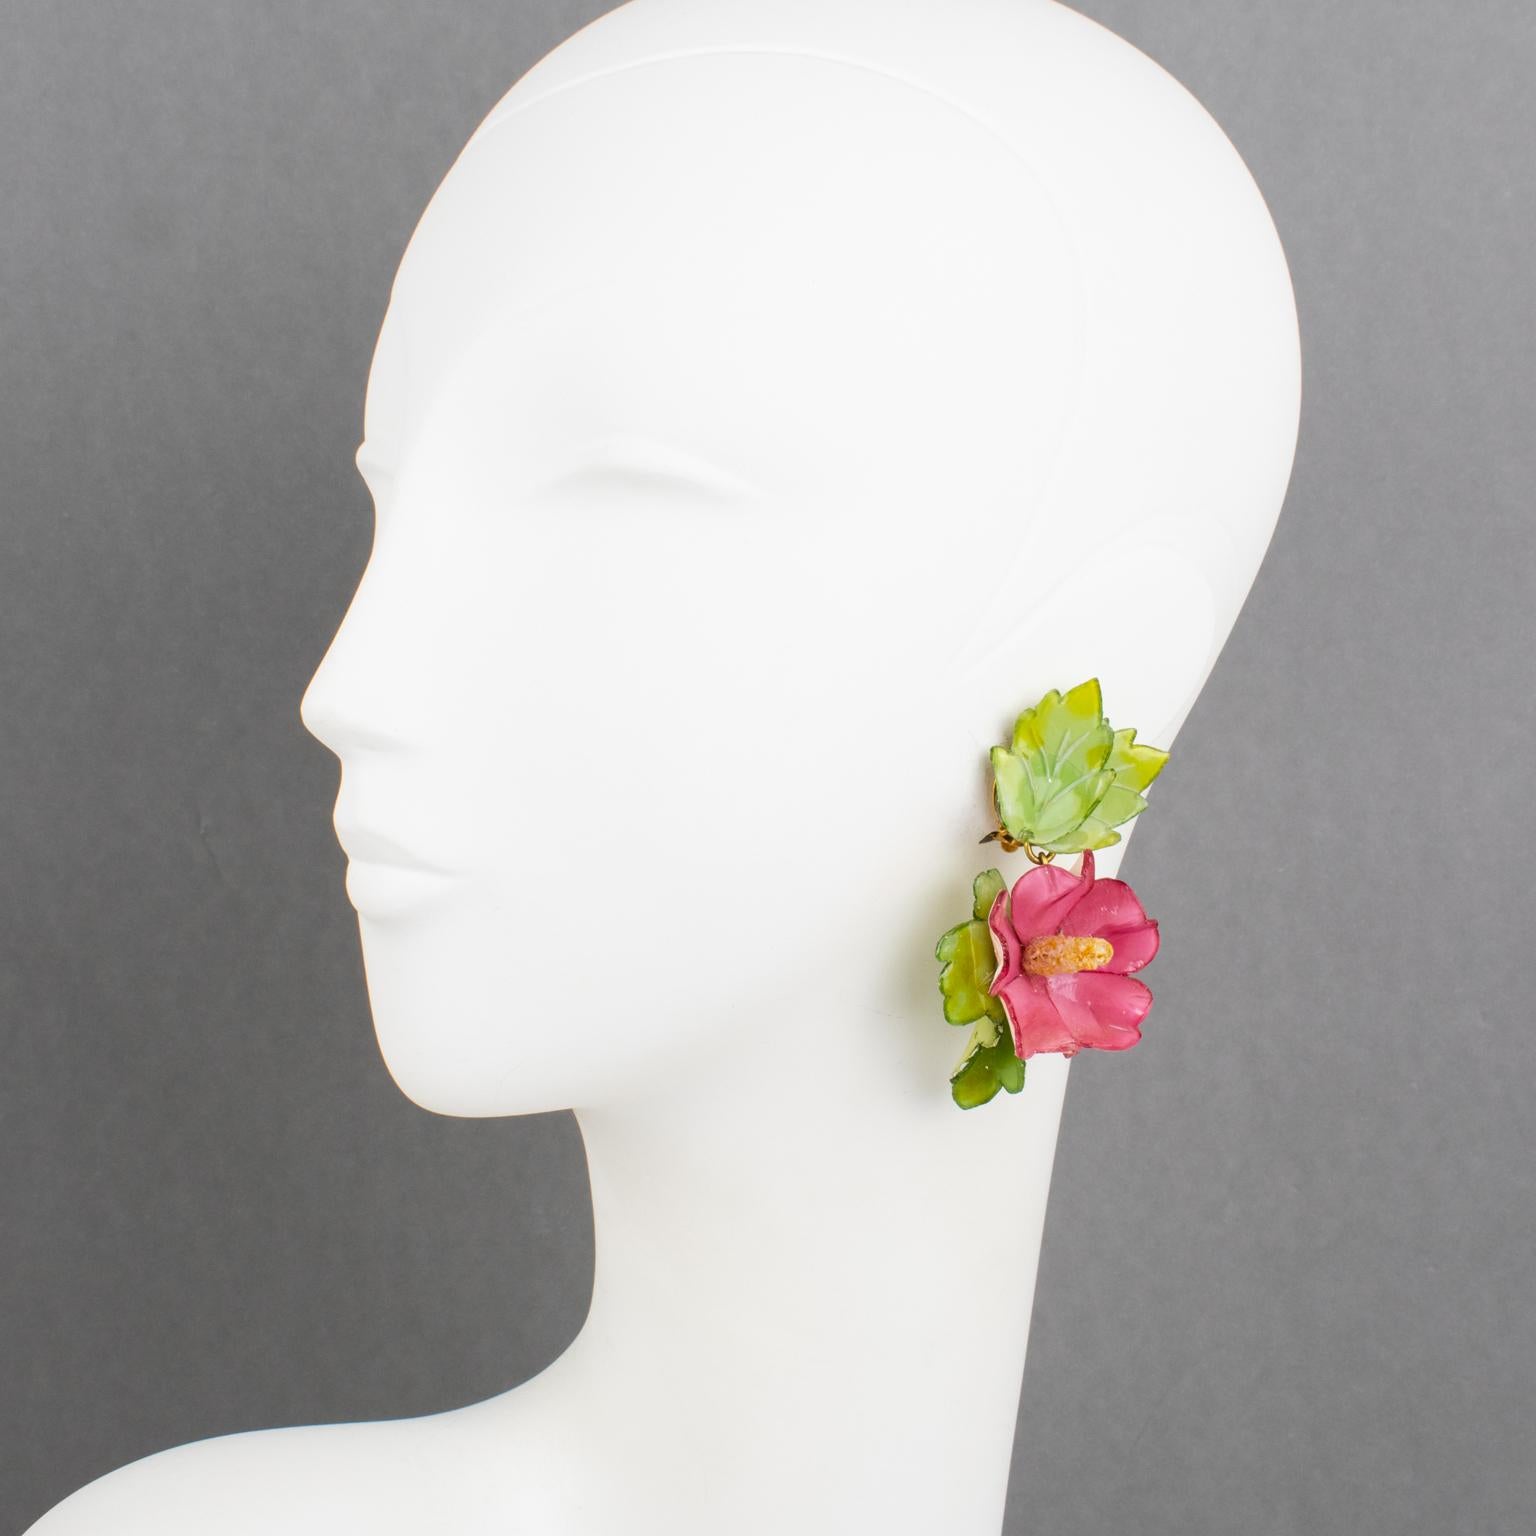 Cilea Paris designed these adorable resin clip-on earrings for French jewelry designer Francoise Montague. The dangle shape features a dimensional hibiscus flower with leaves. The pieces boast powder pink and green colors. There is no visible